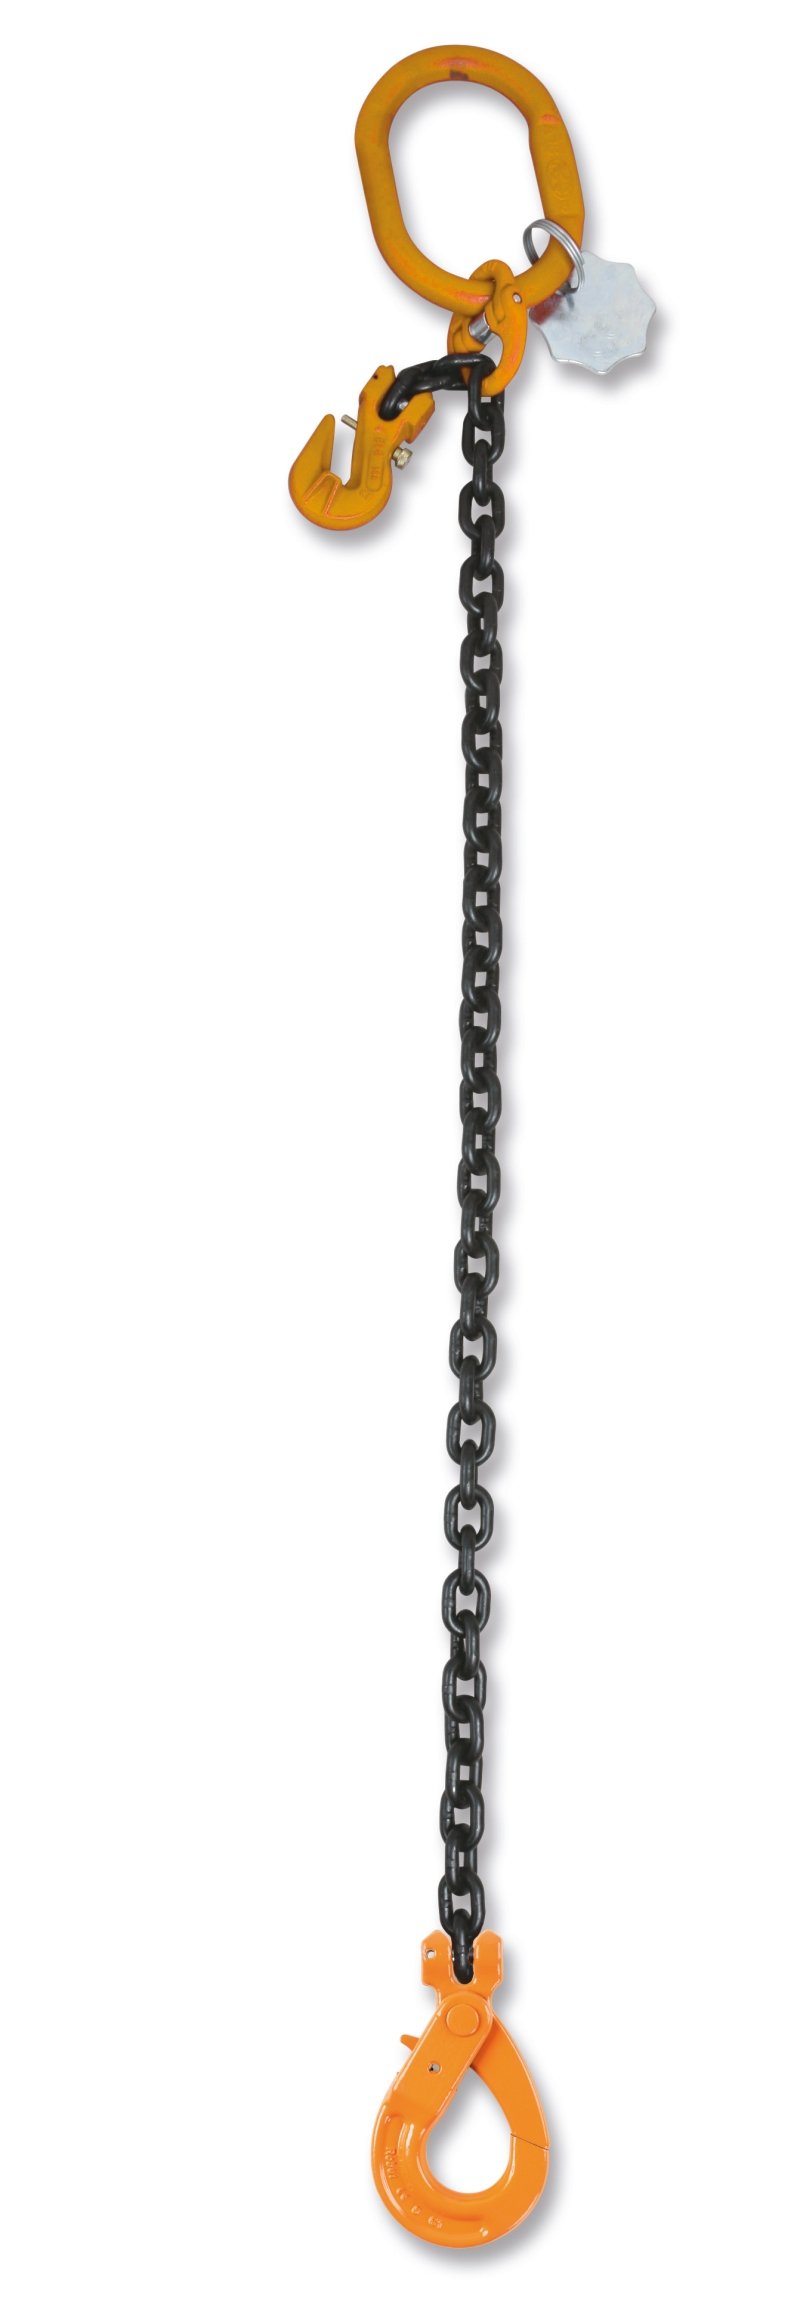 8096SL - Lifting chain slings, 1 leg, with self-locking and clevis grab hooks, grade 8